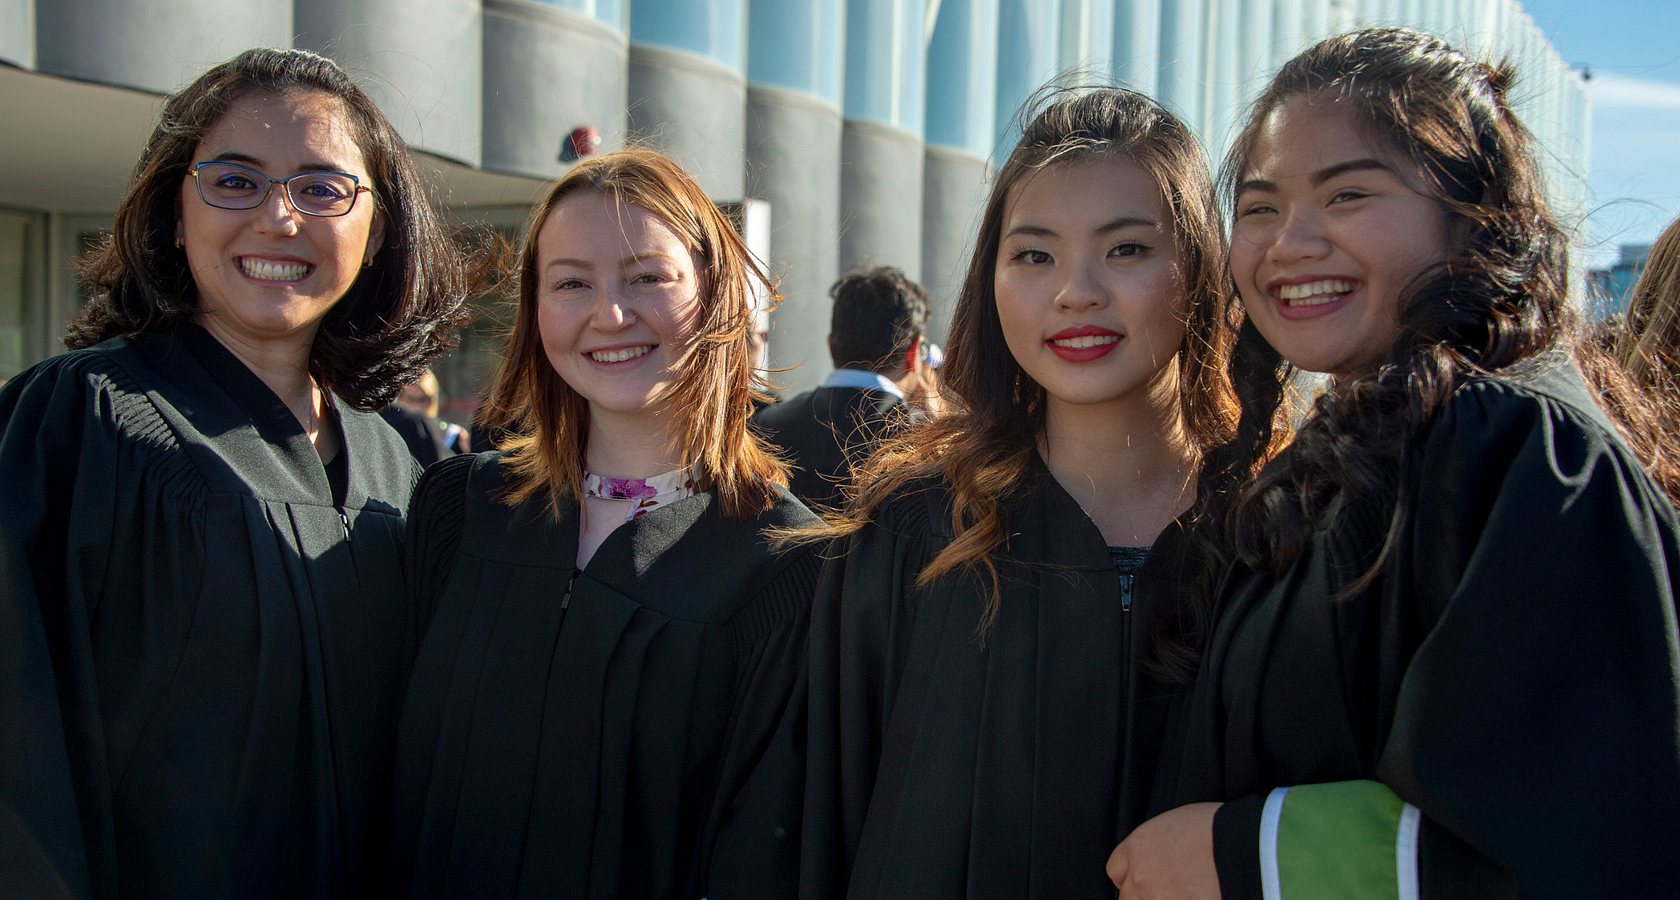 centennial college graduates smiling together at their convocation ceremony standing outside on a sunny day